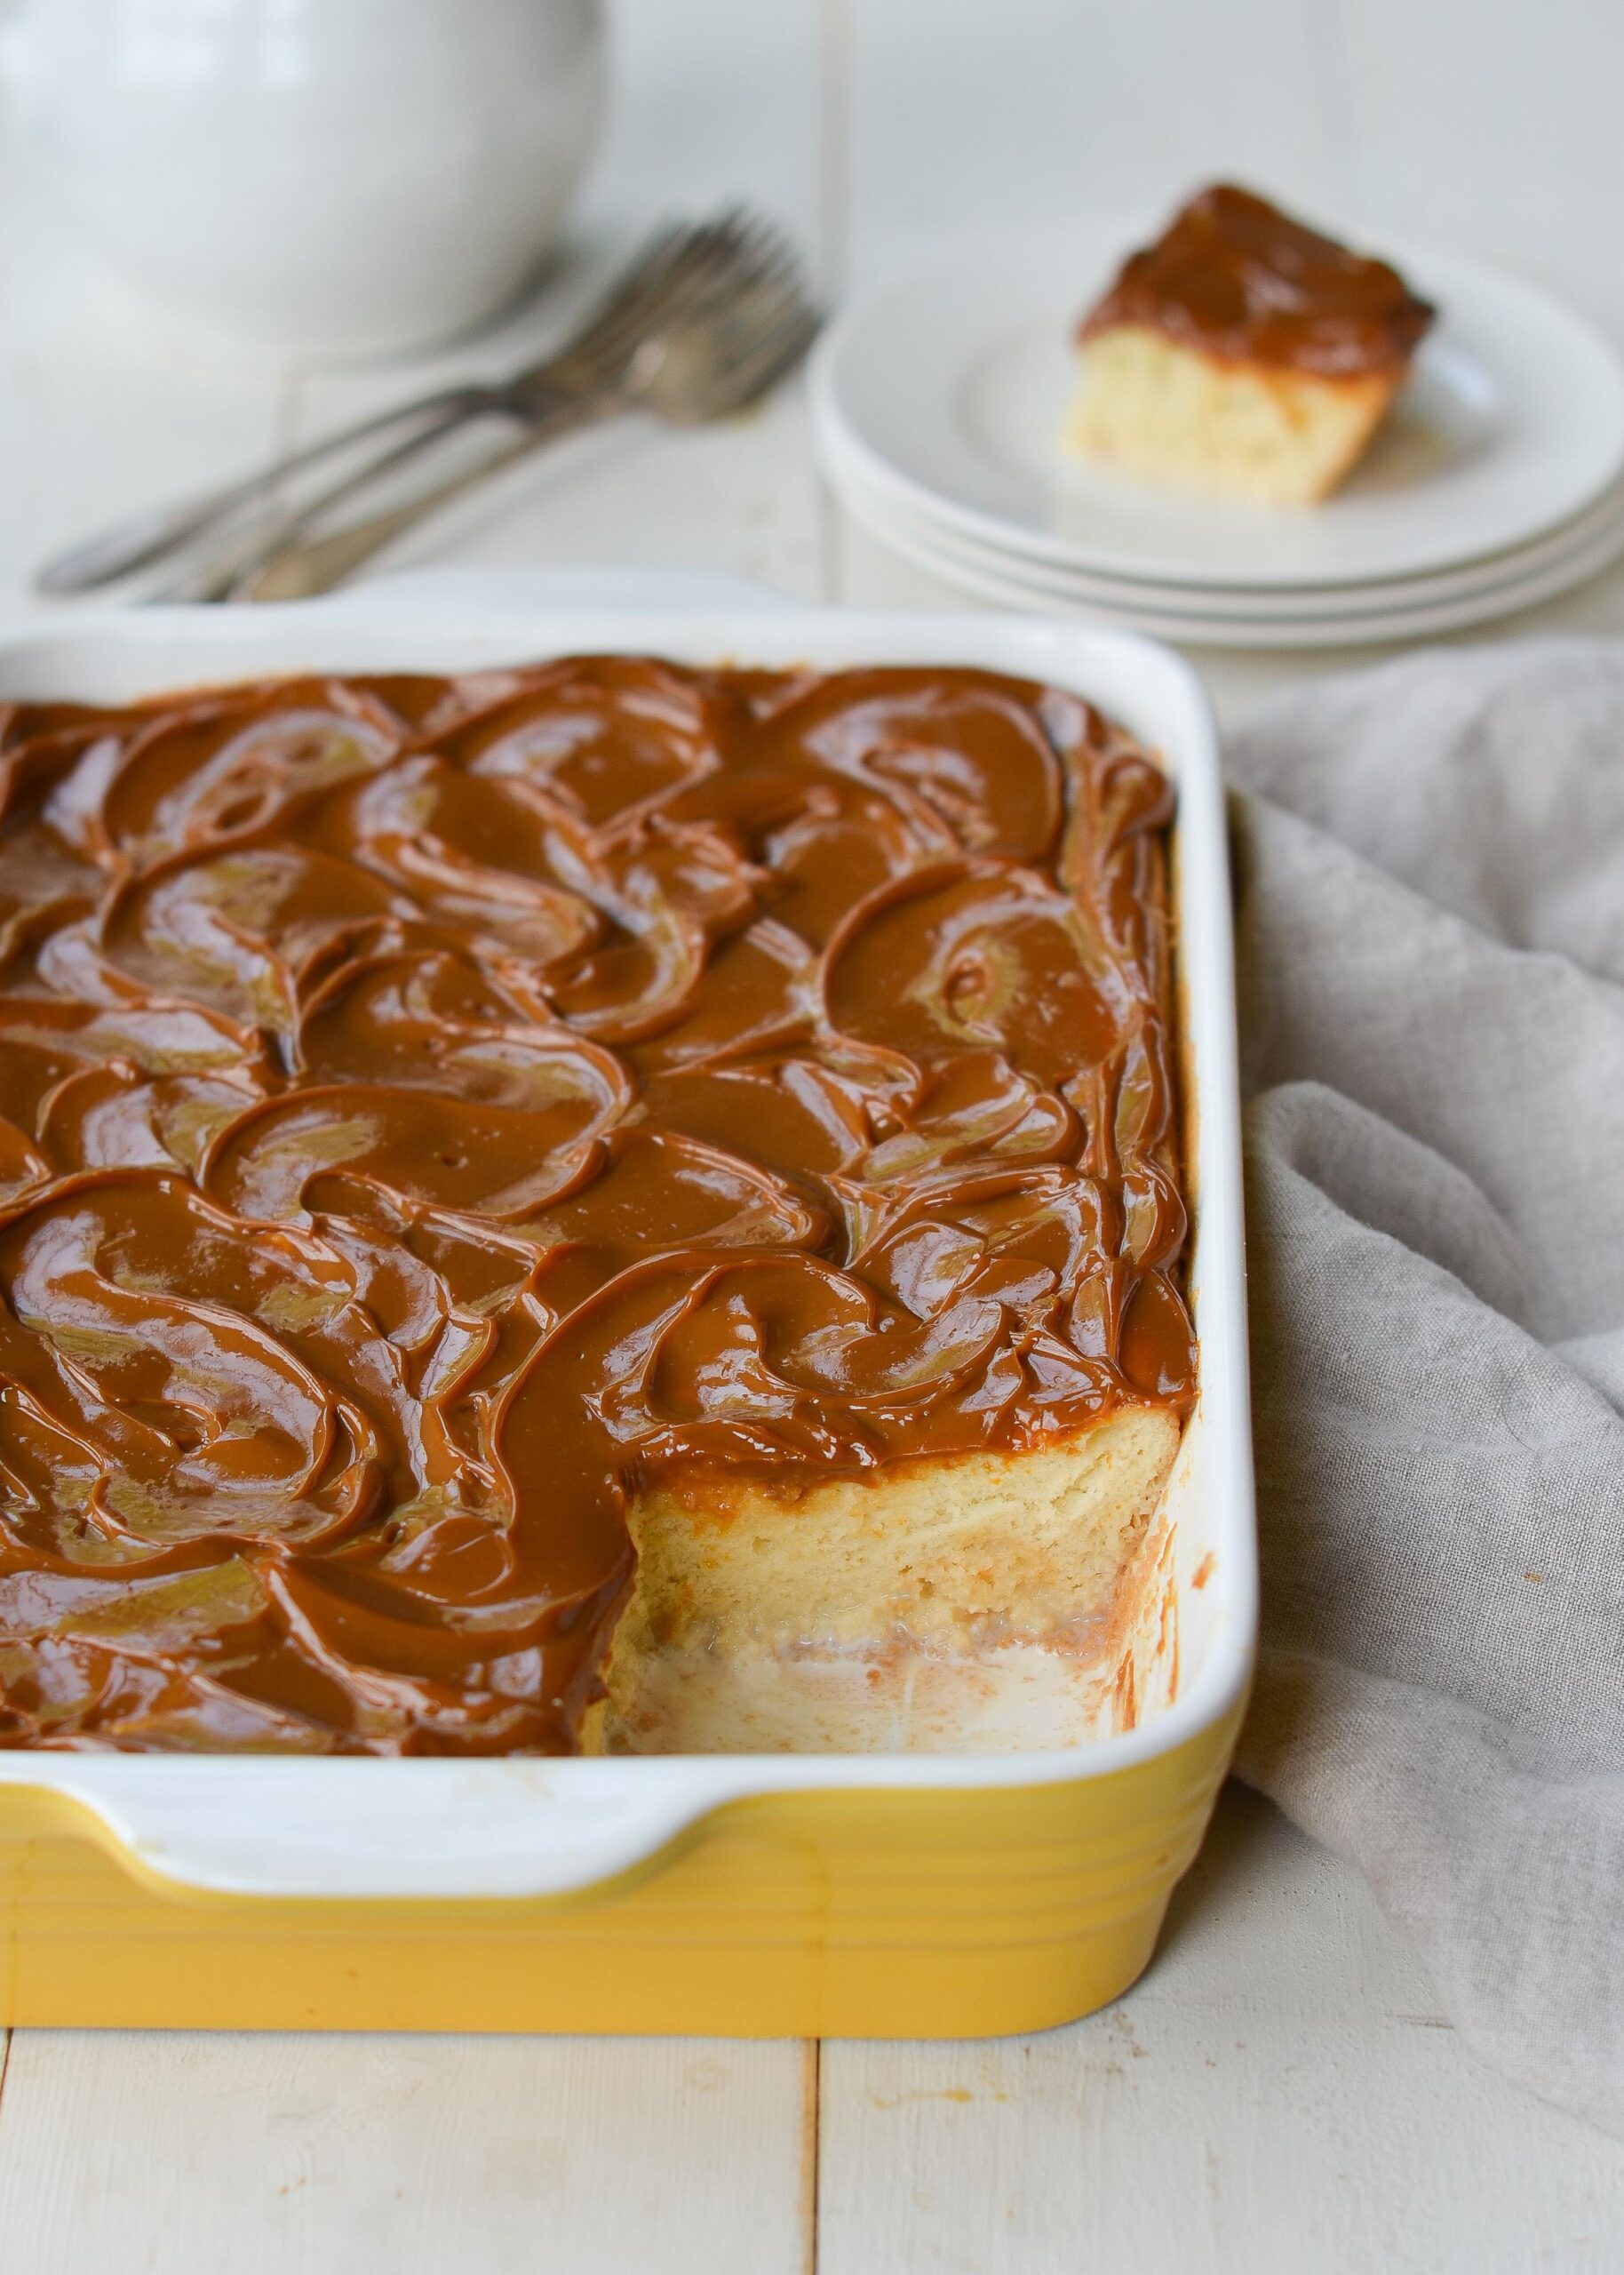  Satisfy your sweet tooth with this mouthwatering Dulce De Leche Cake!